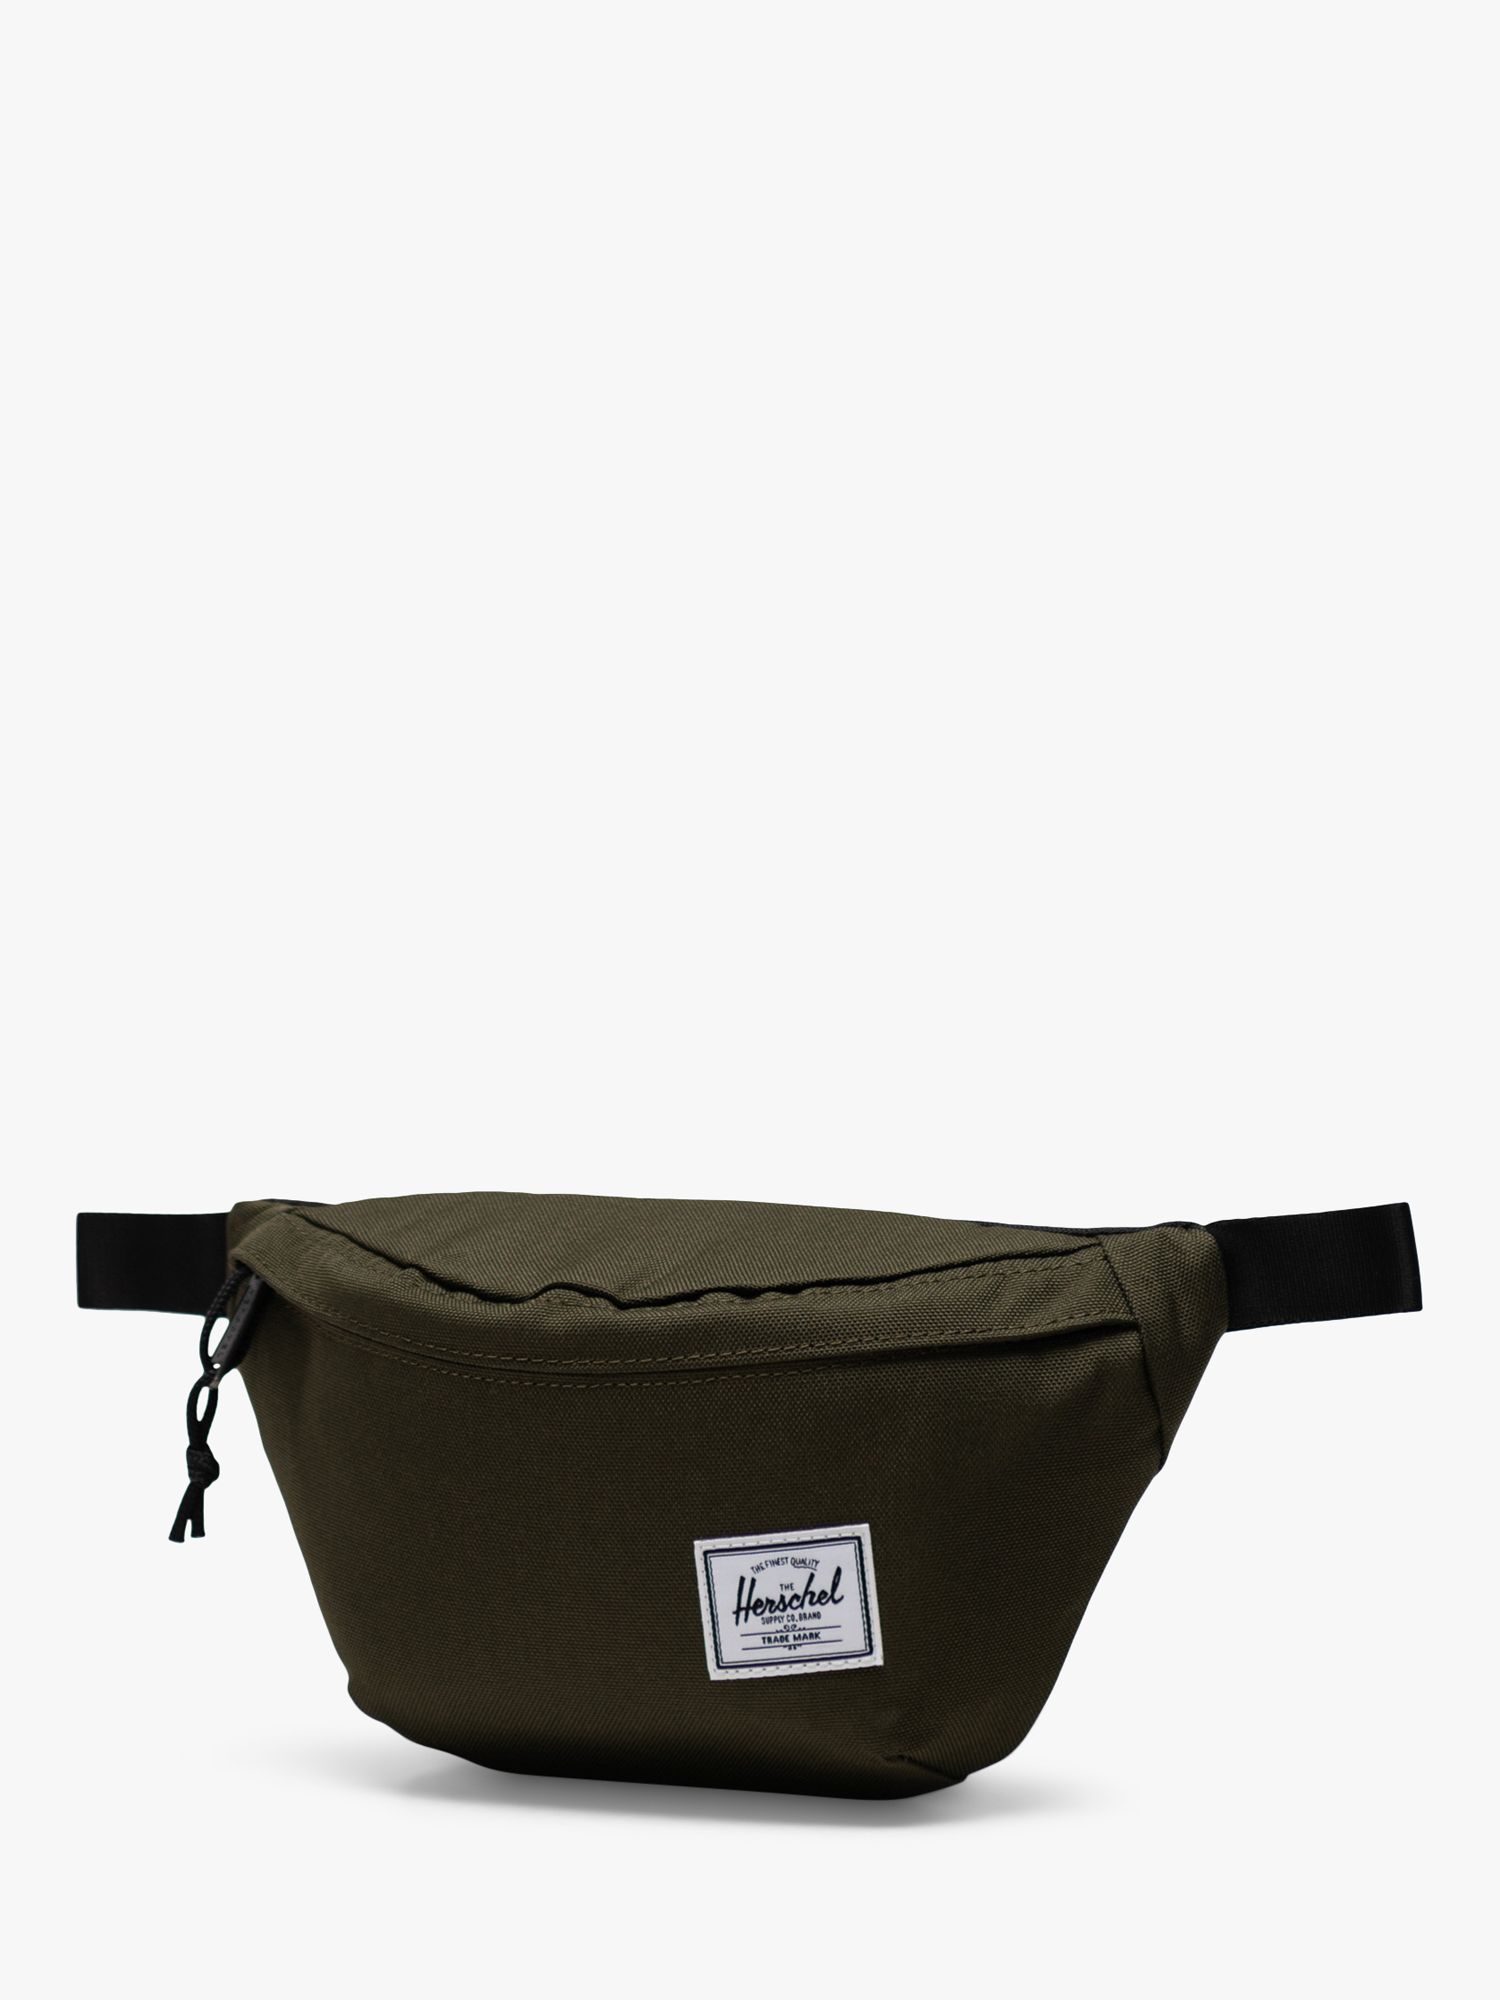 Herschel Supply Co. Classic Hip Pack, Ivy Green at John Lewis & Partners